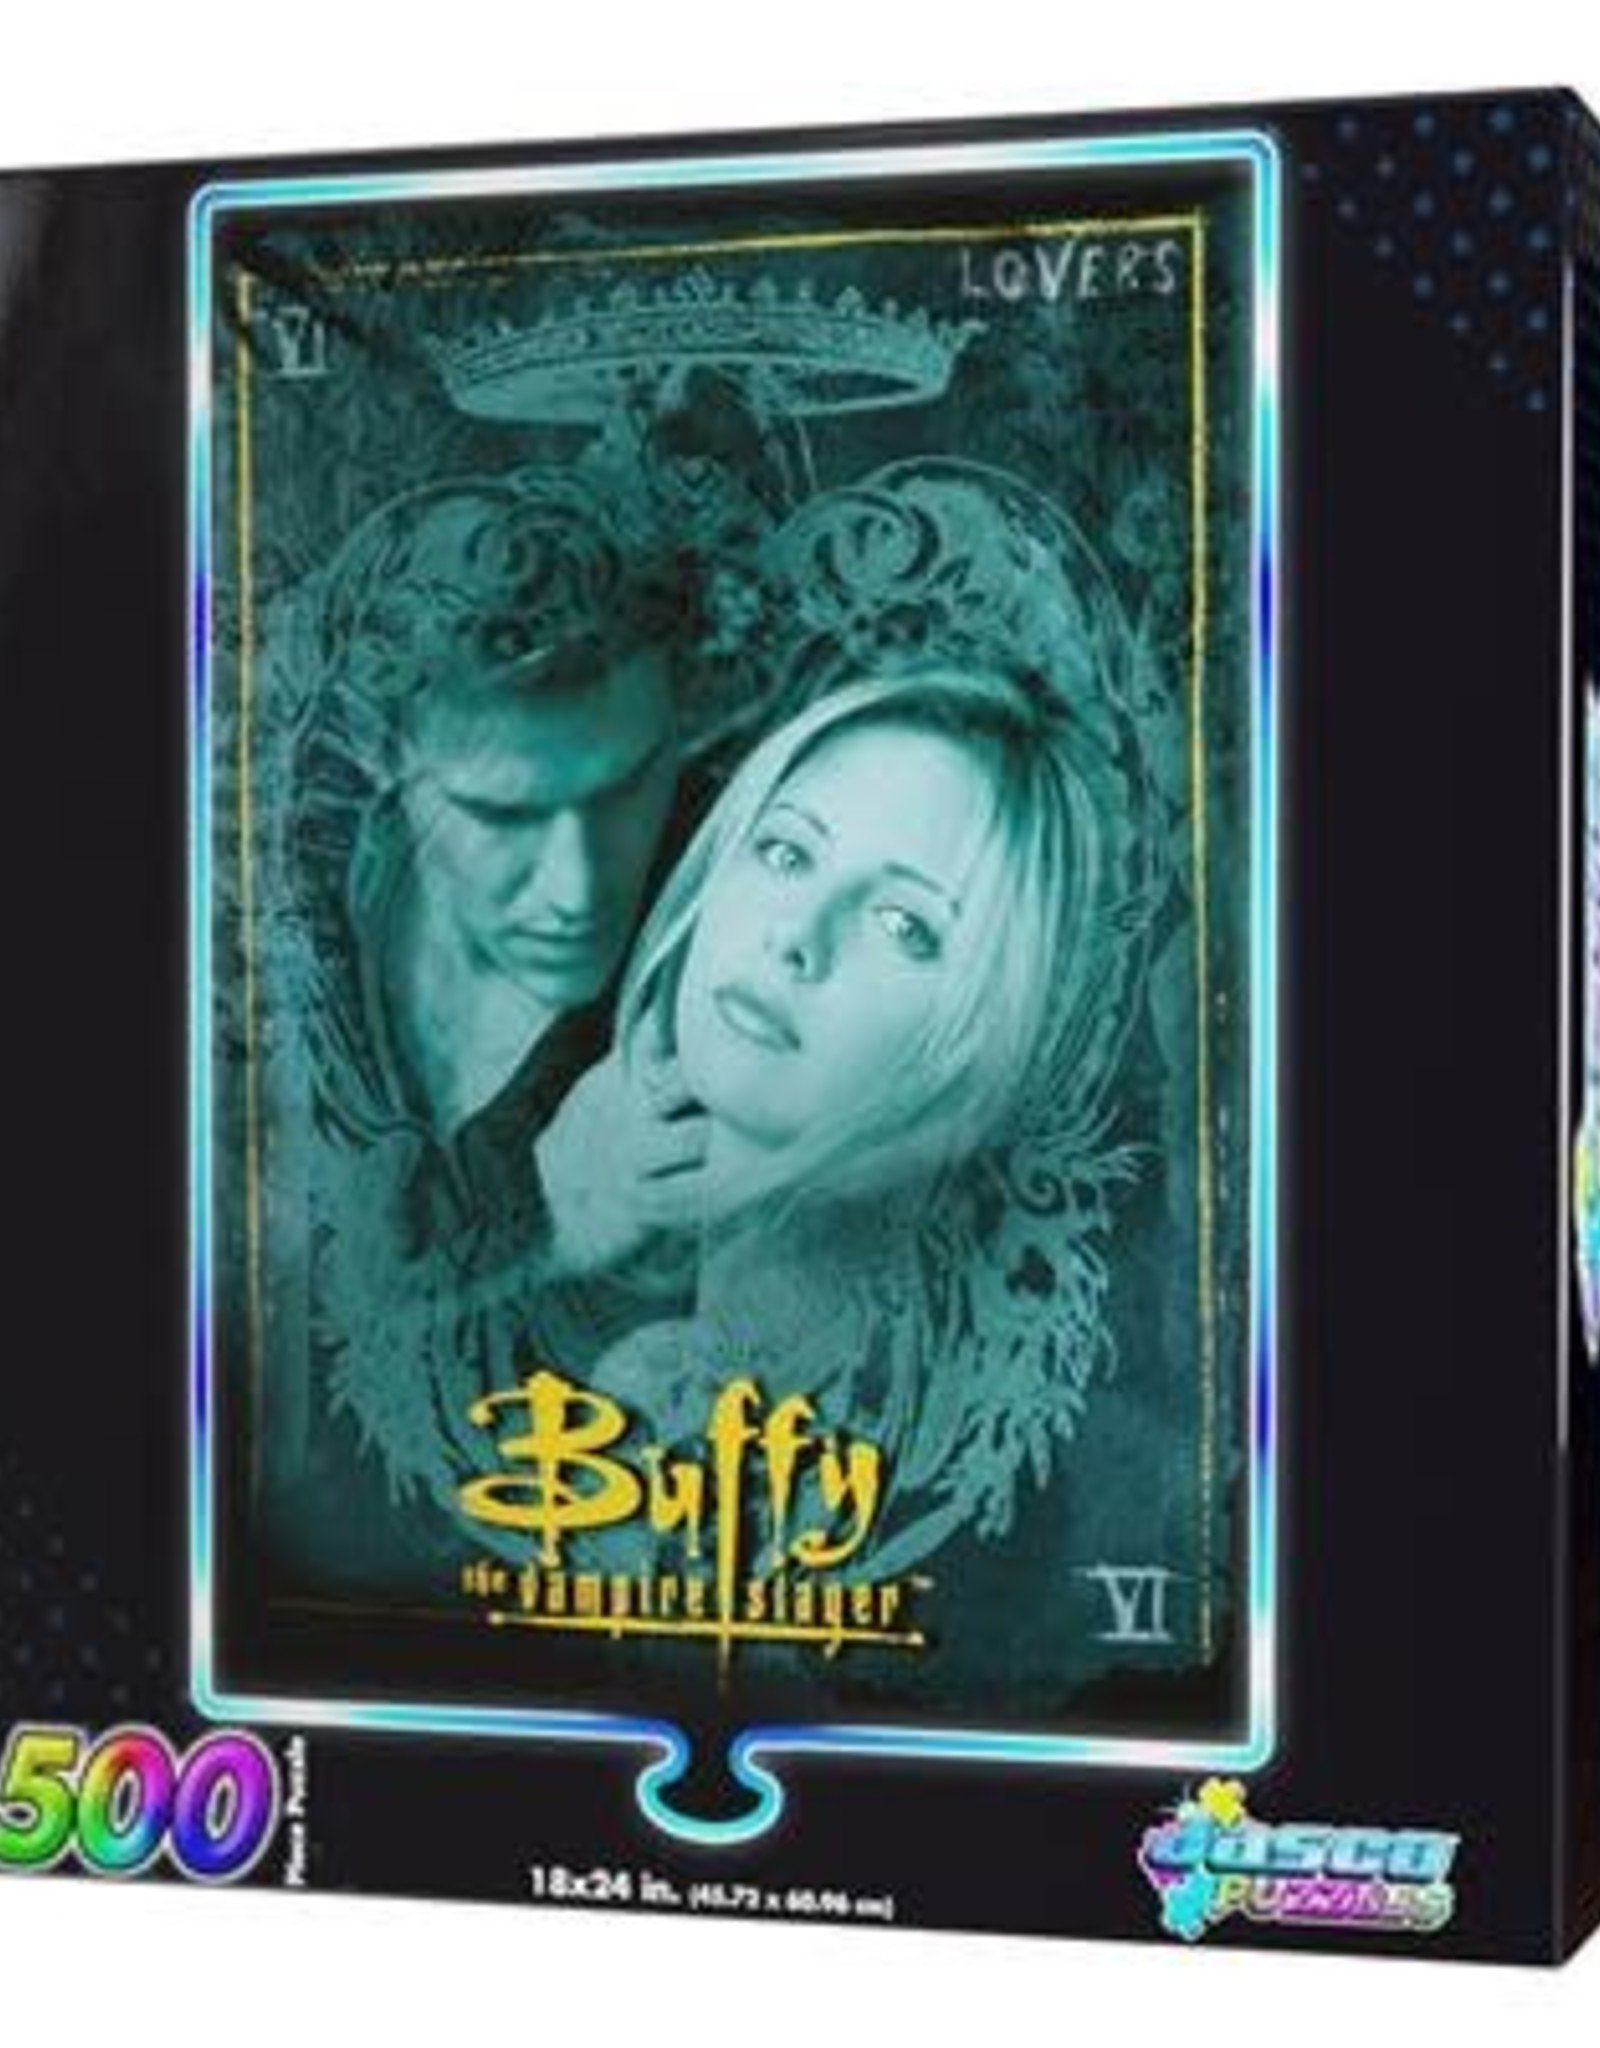 Buffy and Angel 500 piece puzzle